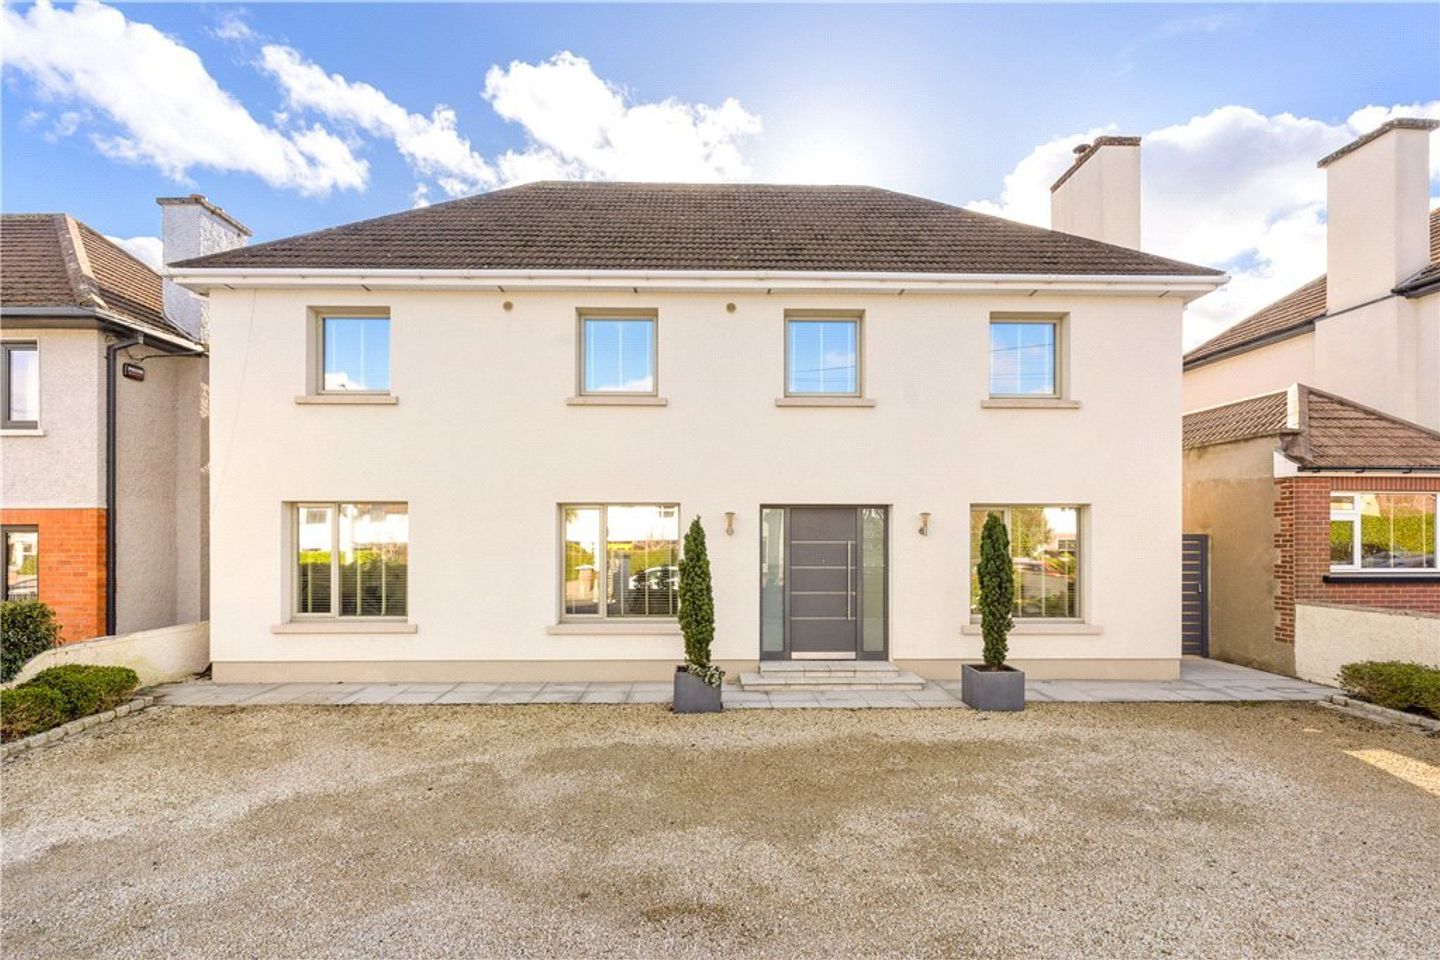 32 Woodbine Road, Booterstown, Co. Dublin, A94V244